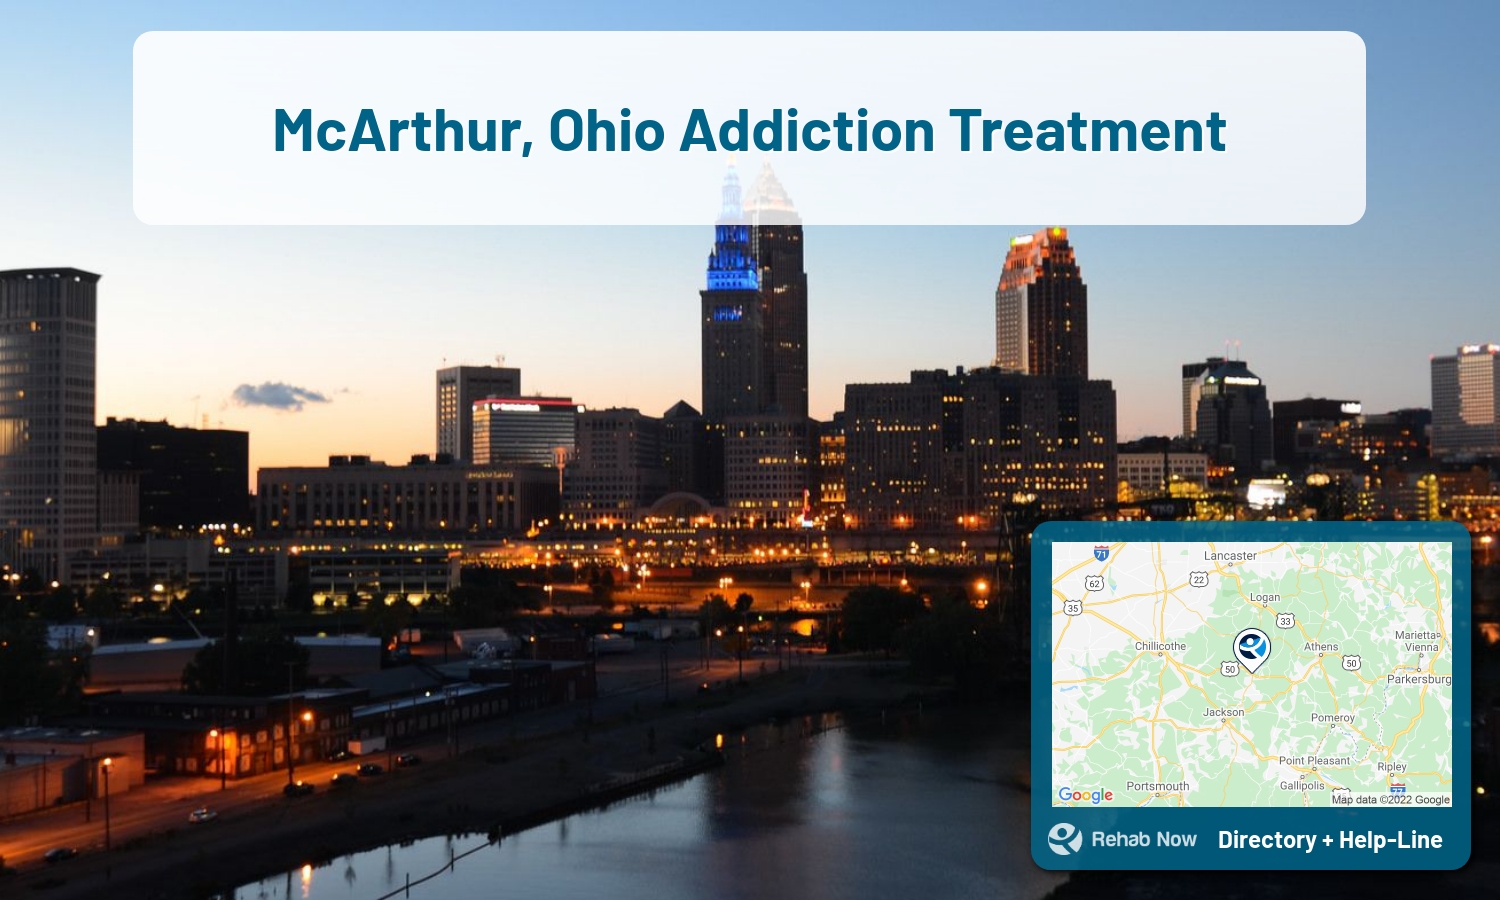 McArthur, OH Treatment Centers. Find drug rehab in McArthur, Ohio, or detox and treatment programs. Get the right help now!